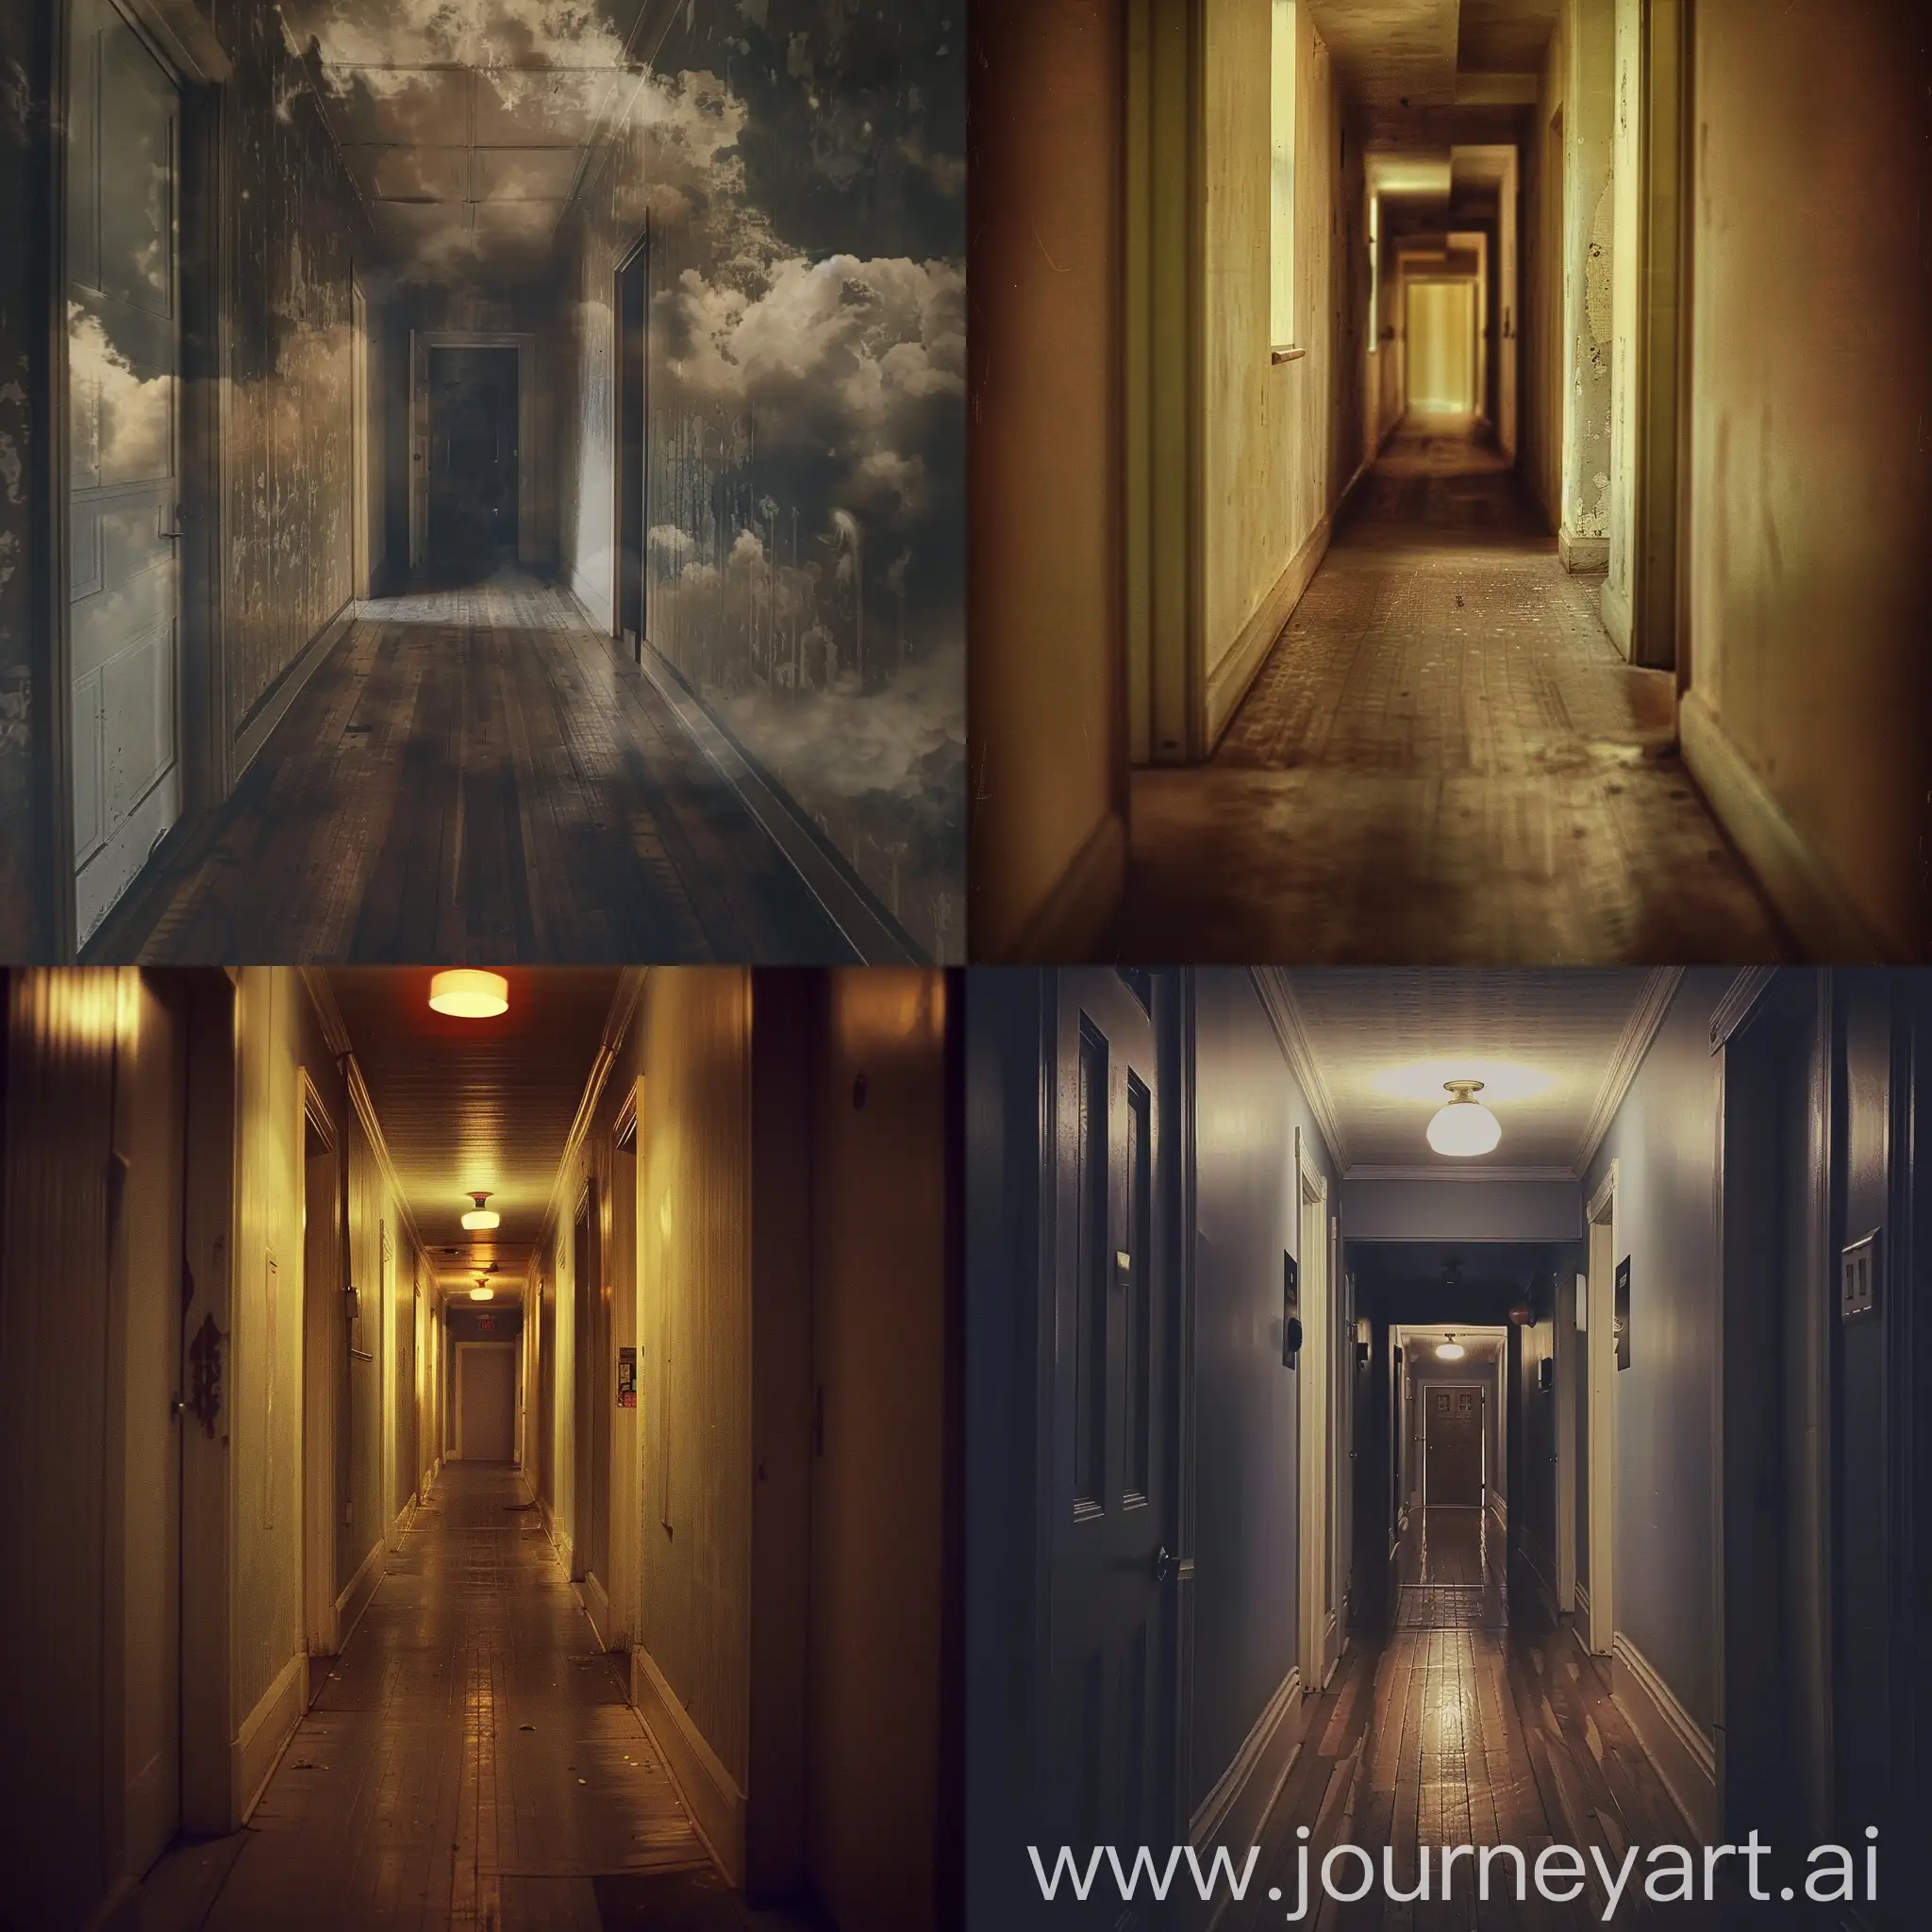 /imagine hallway, liminal space, empty, eerie atmosphere, uncanny valley, surreal, dream like